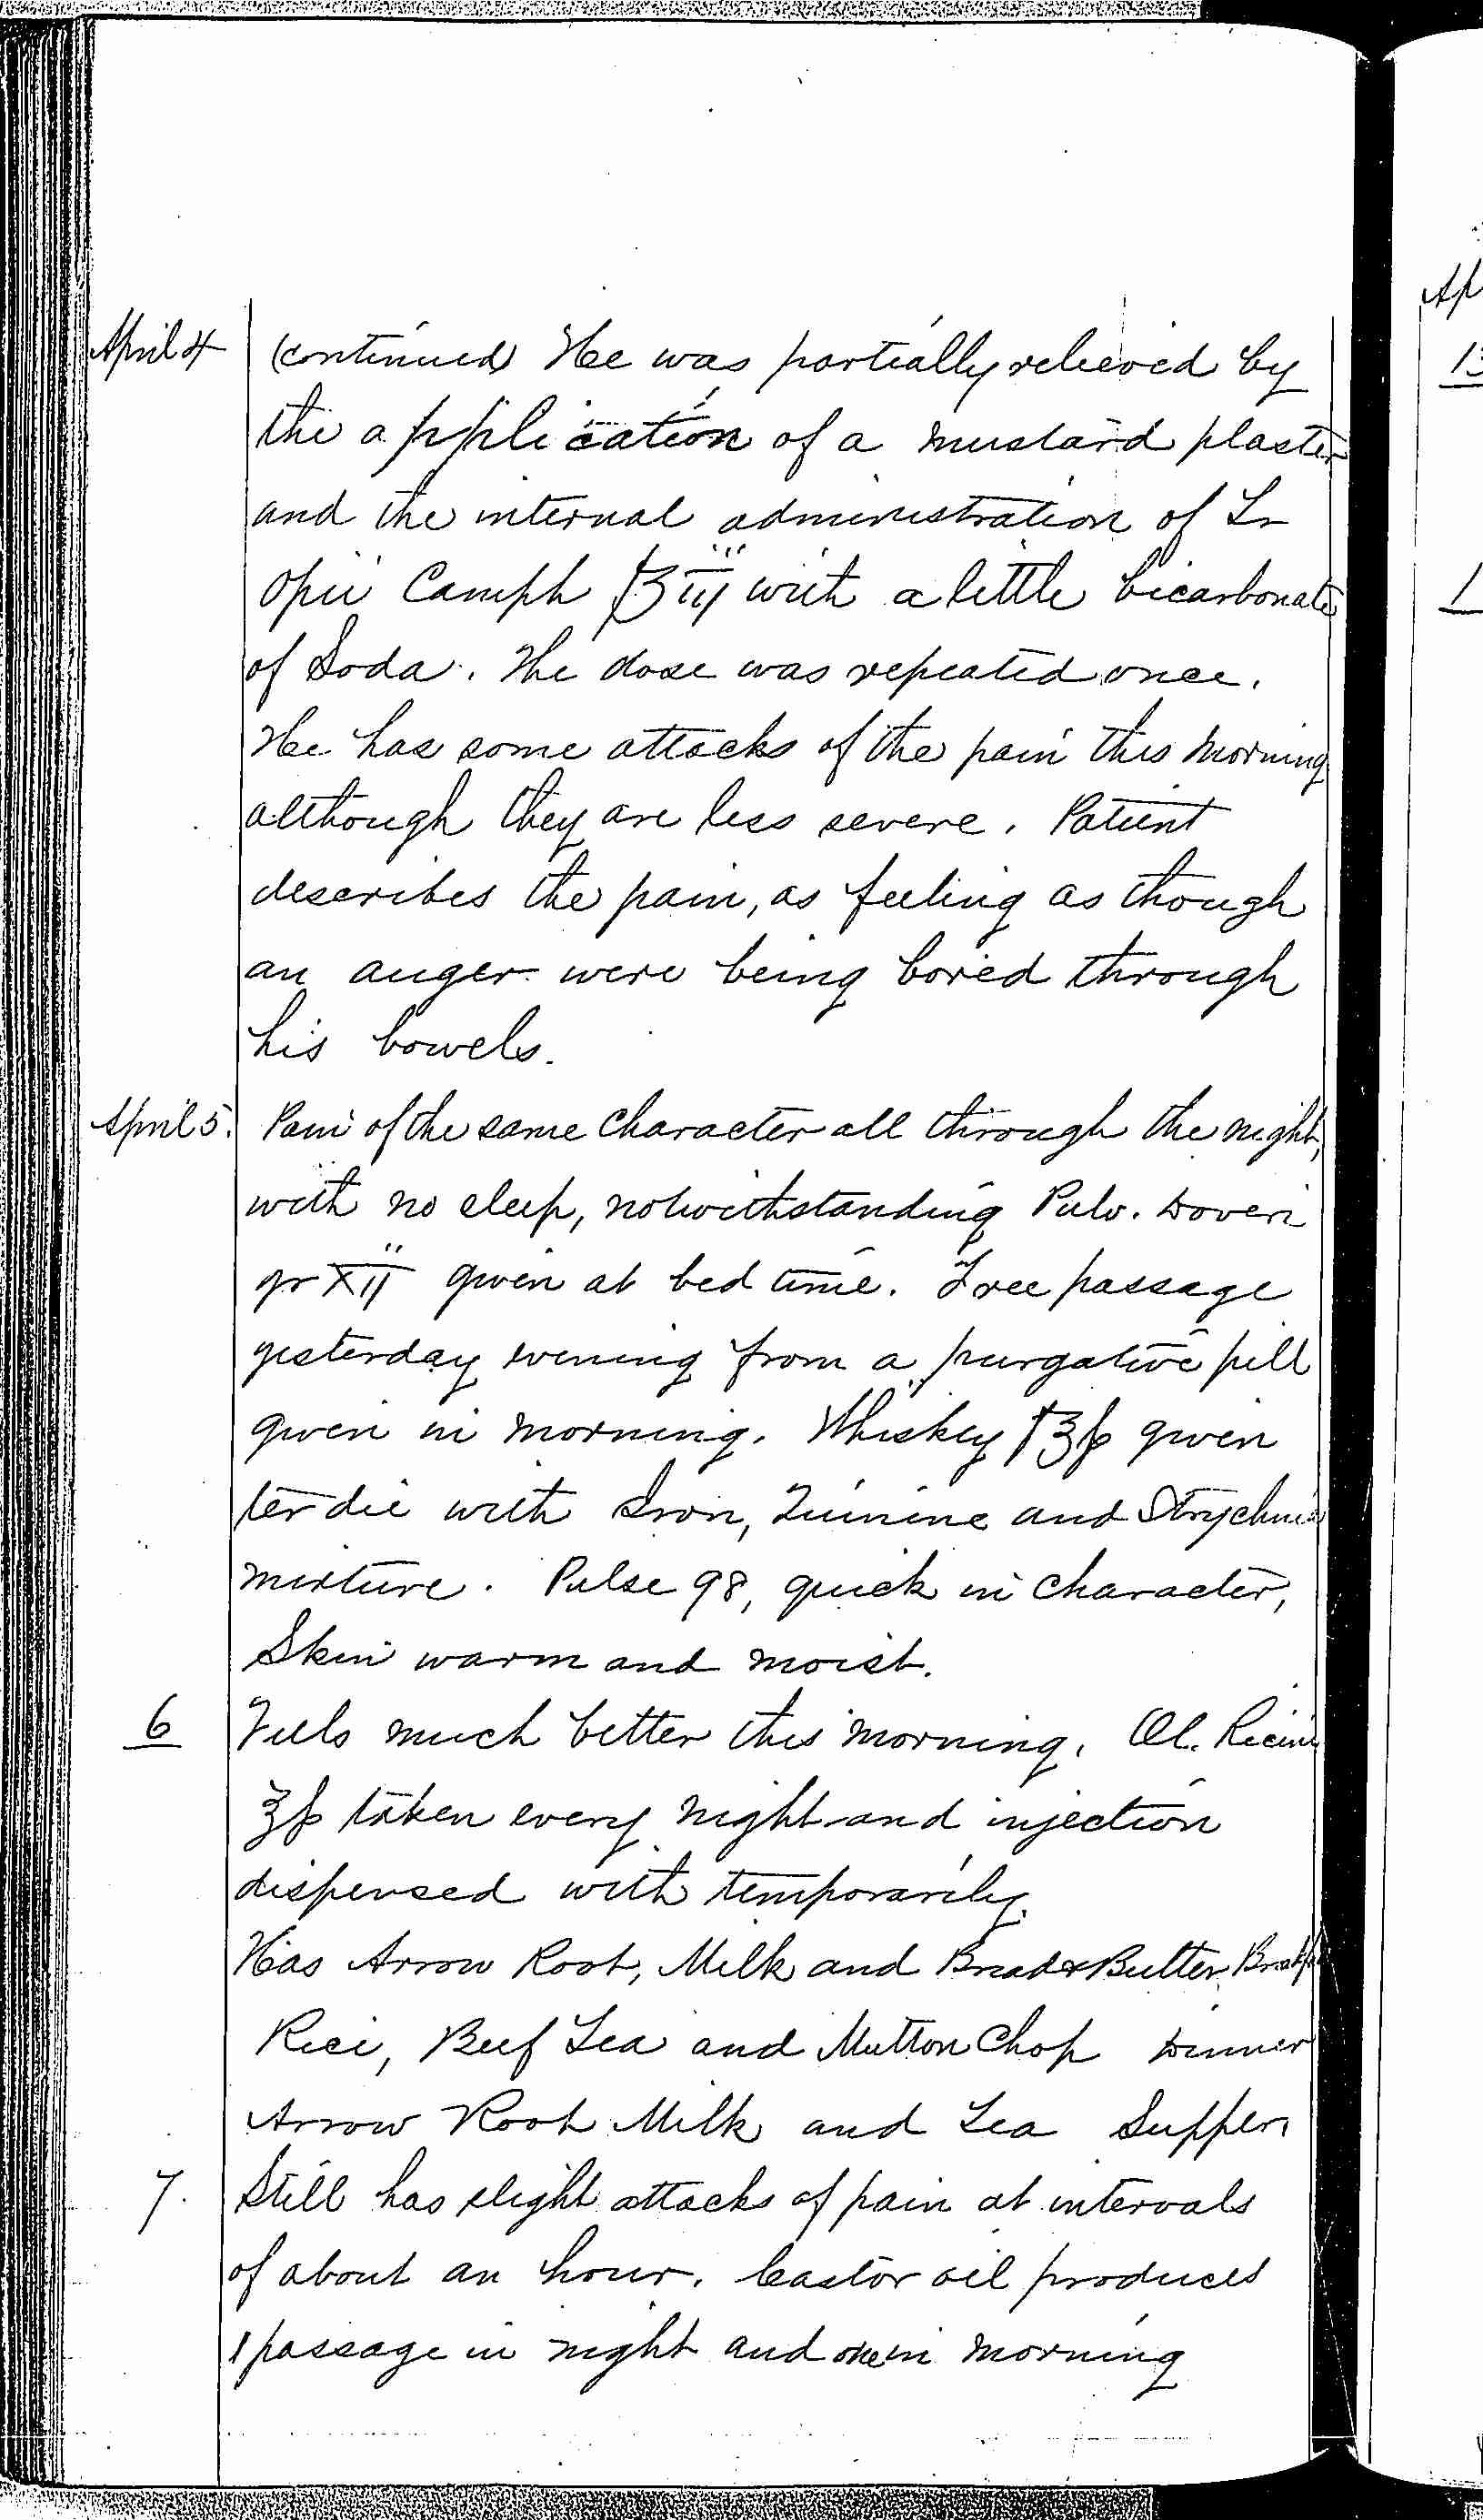 Entry for William Brady (page 4 of 5) in the log Hospital Tickets and Case Papers - Naval Hospital - Washington, D.C. - 1868-69